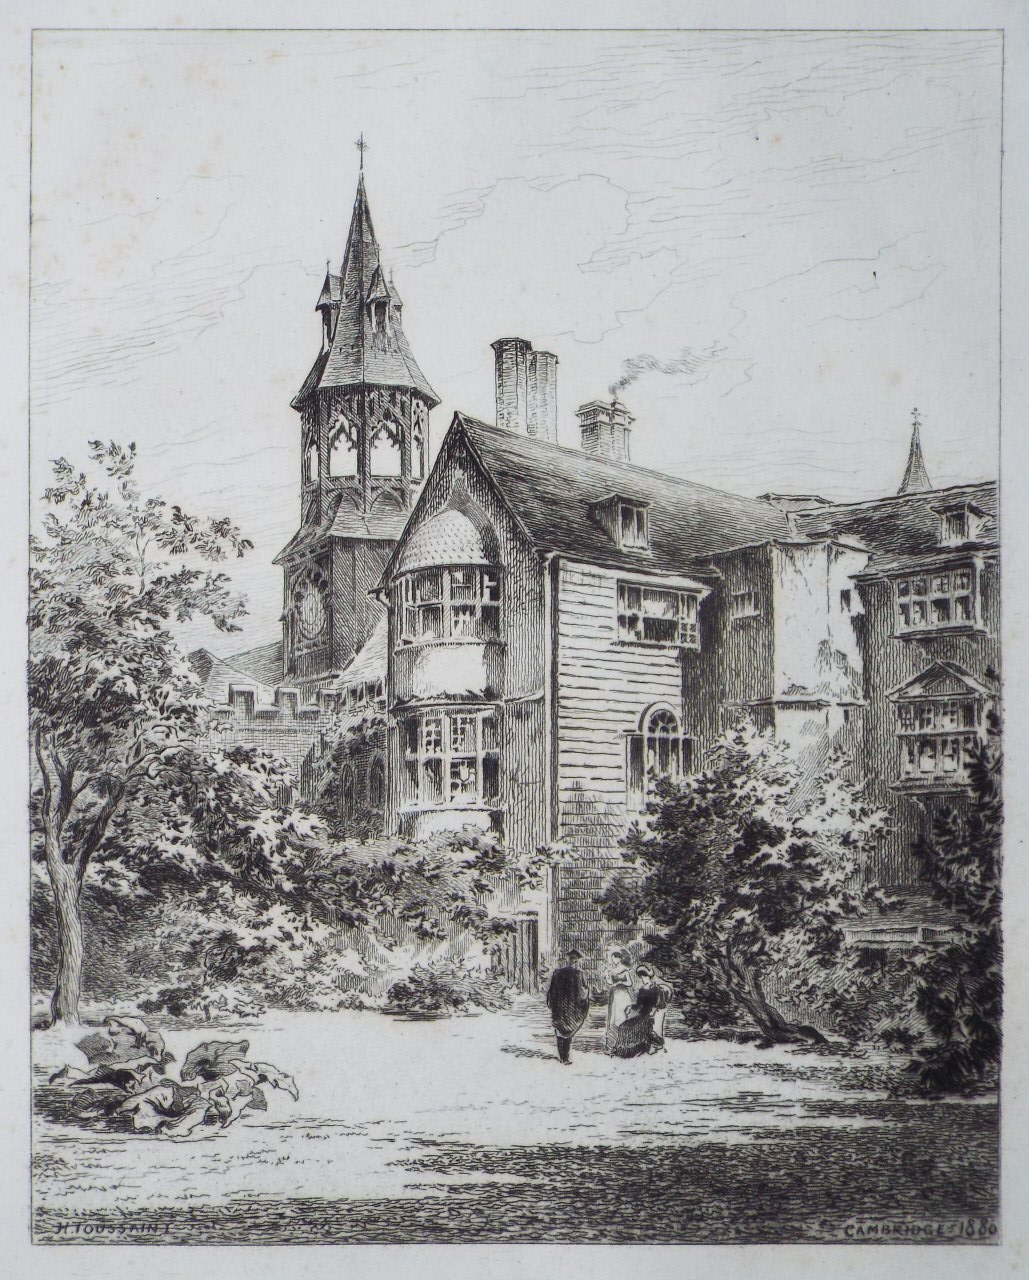 Etching - The Lodge of Queens' College - Toussaint